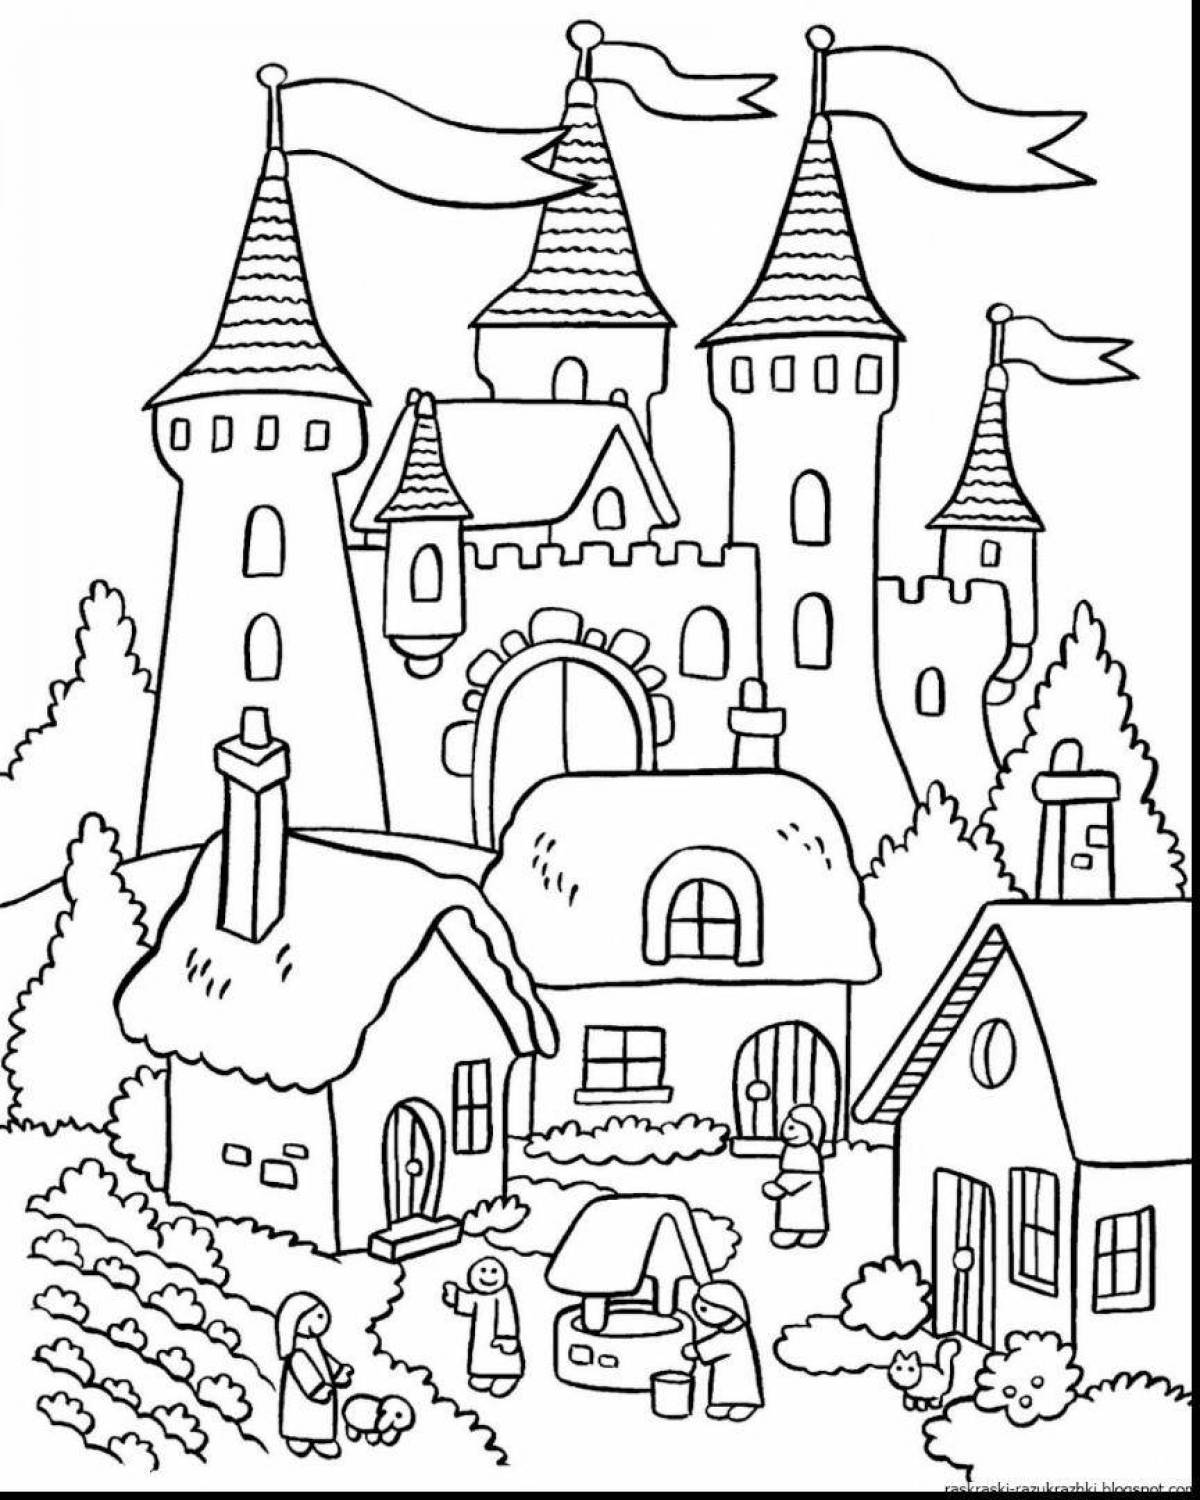 Glamourous castle coloring book for children 6-7 years old